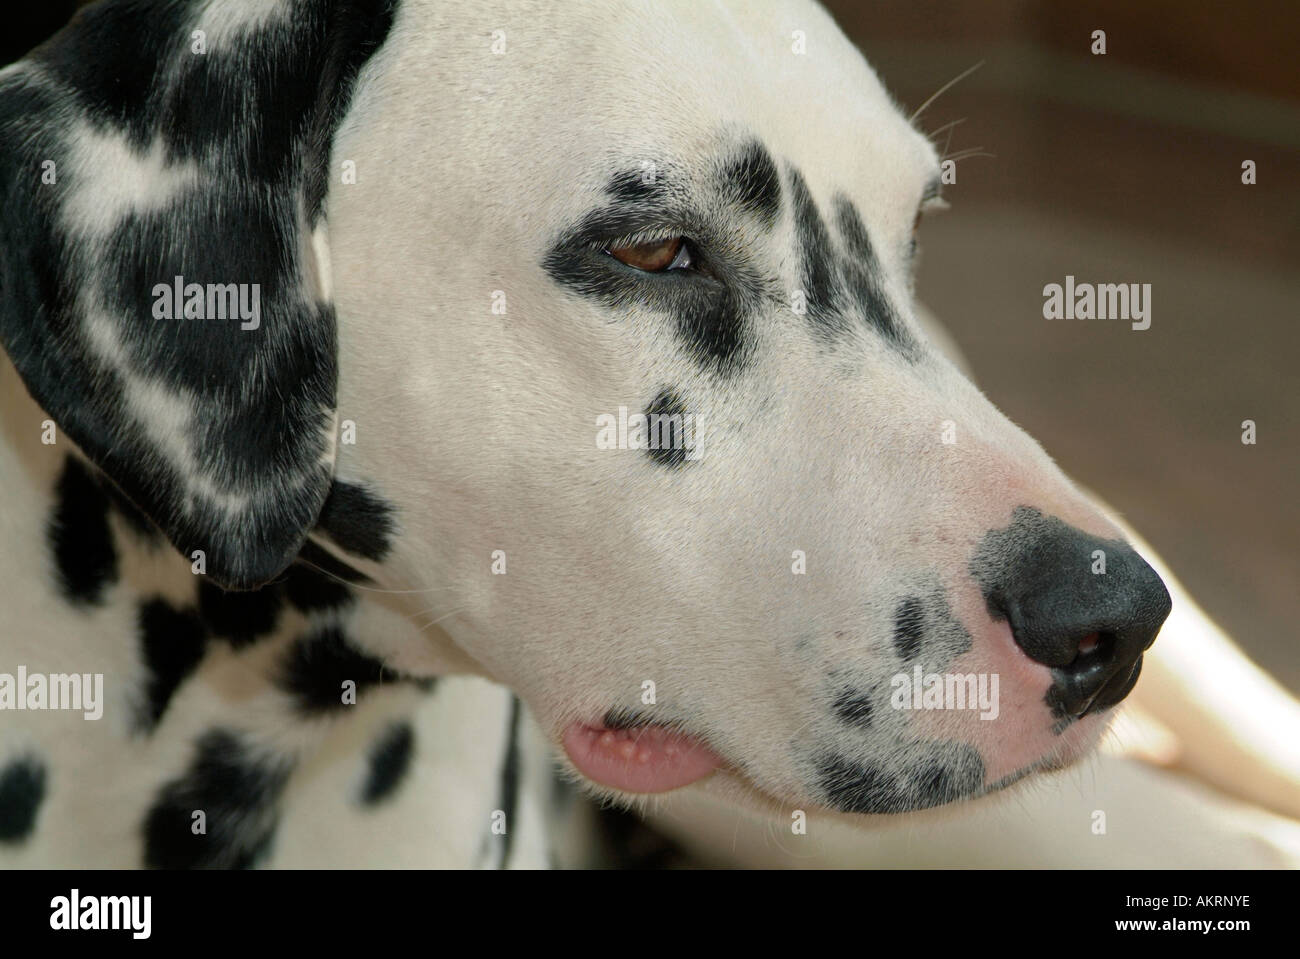 portrait dog Dalmatian side view from head he is looking tired Stock Photo